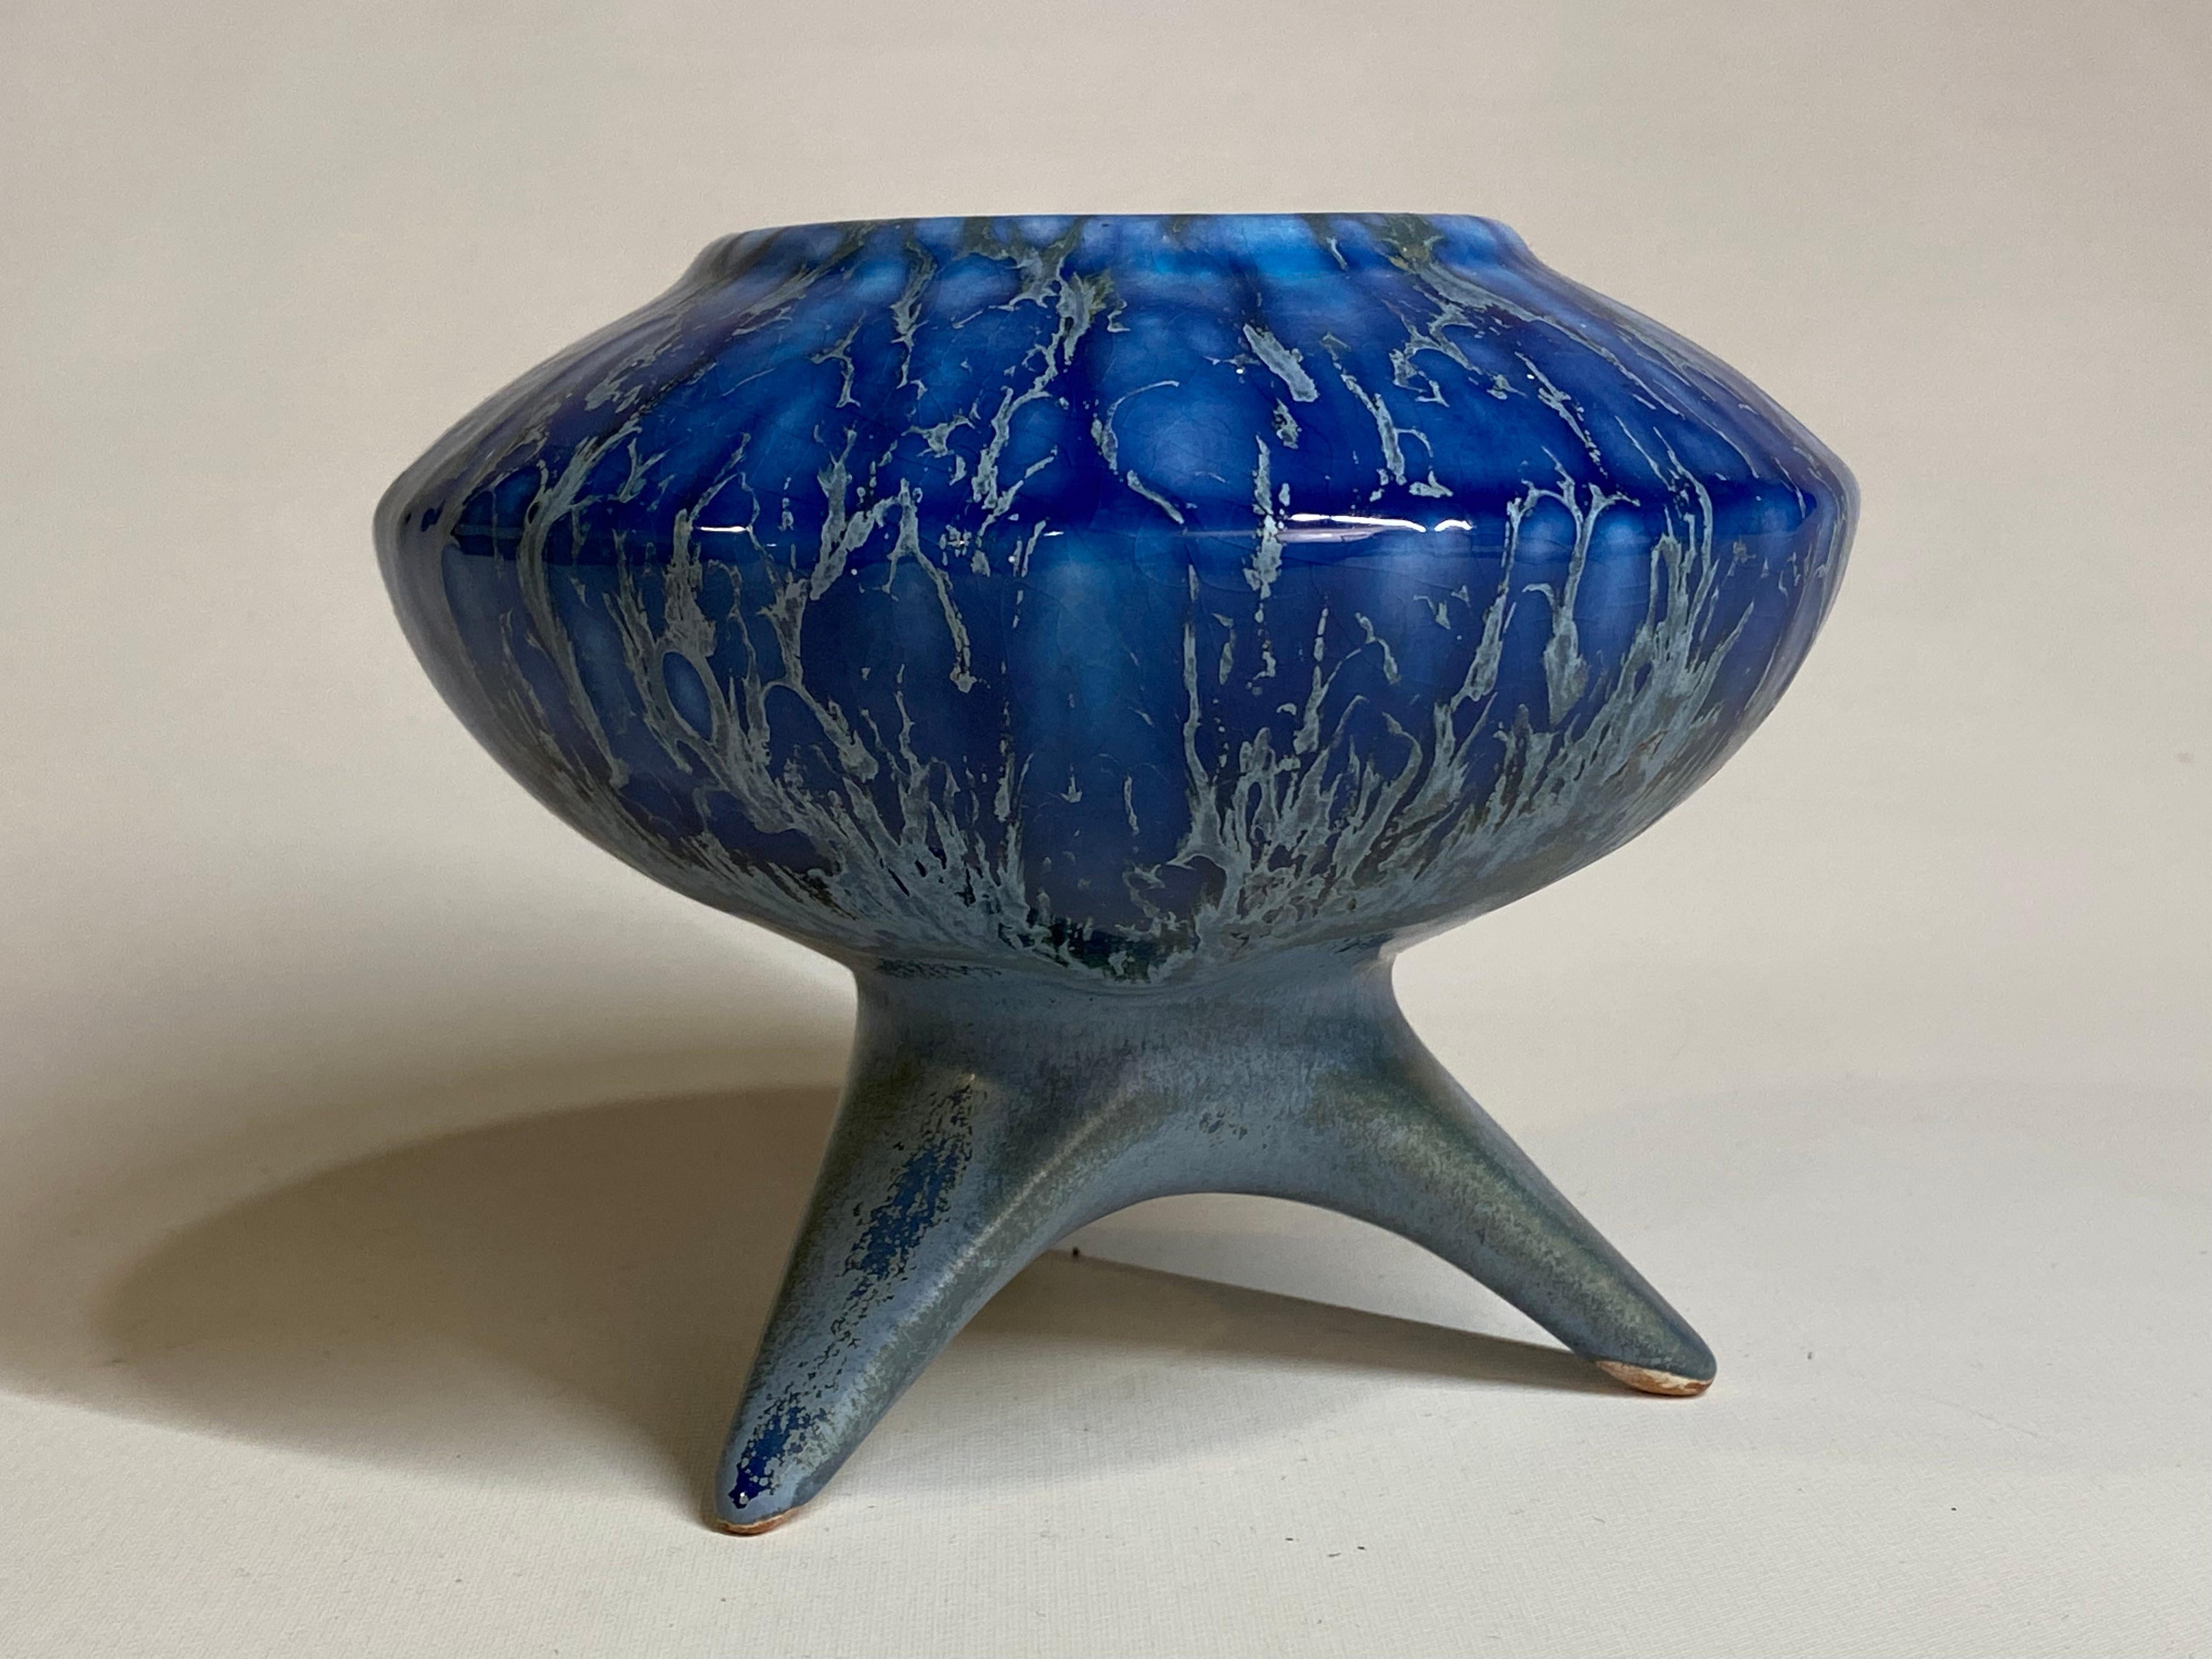 Amazing futuristic Mid-Century Modern fat lava and flambe blue glazed tripod vase, circa 1950-1960. Glossy to mat drip glazed vessel with three splayed legs holding up a space saucer type bowl. The glaze colors range from a deep gloss blue to a